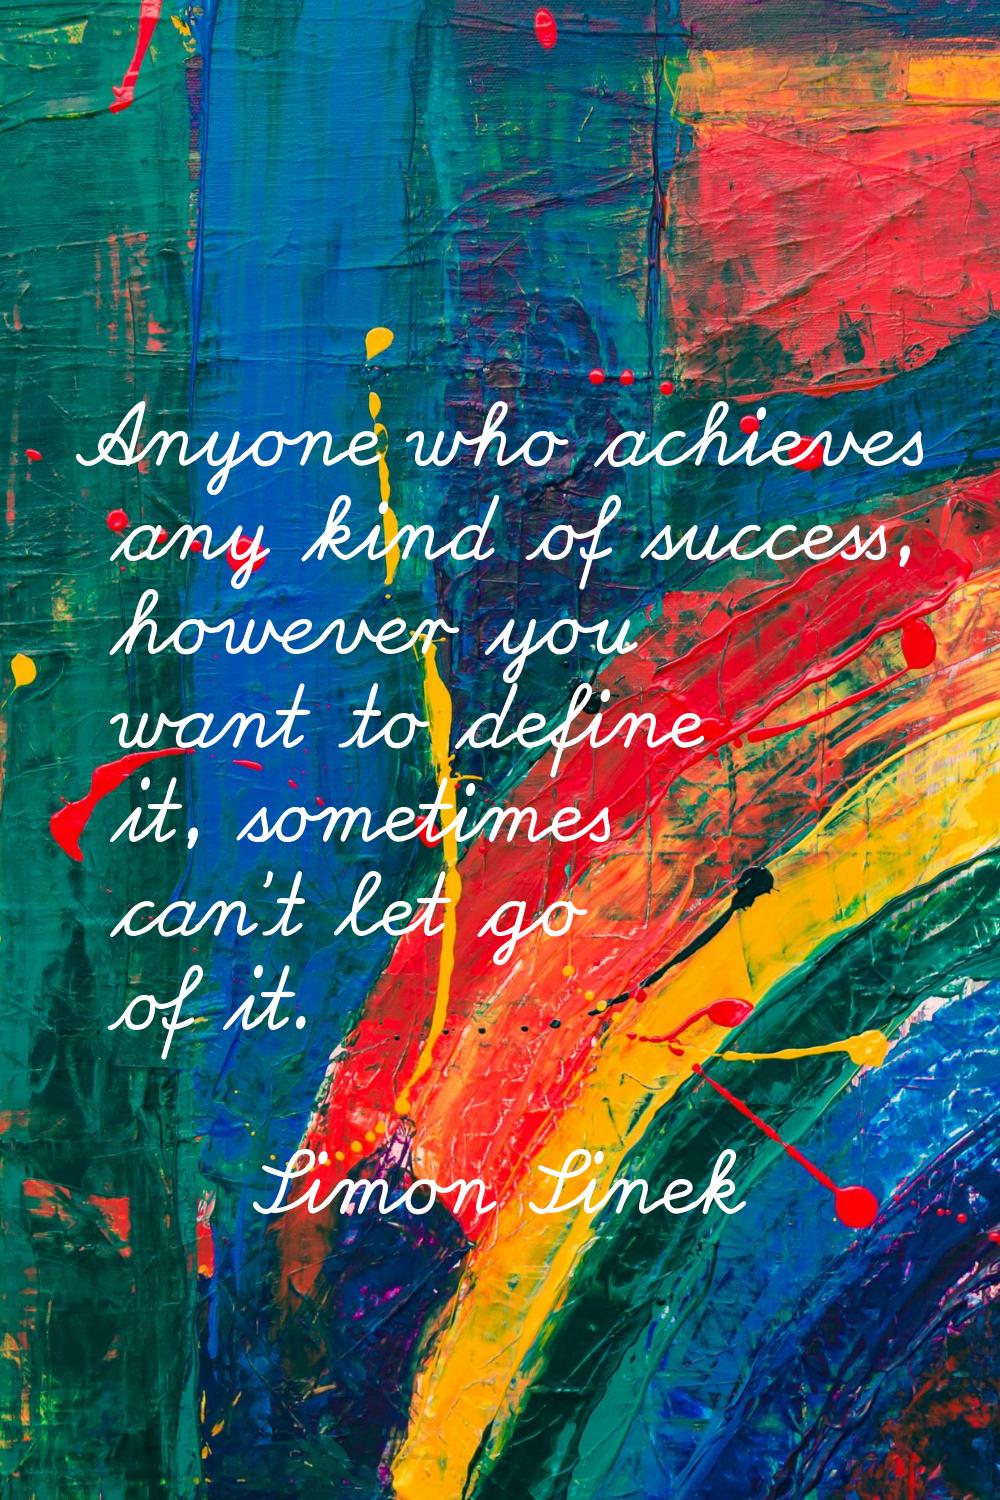 Anyone who achieves any kind of success, however you want to define it, sometimes can't let go of i